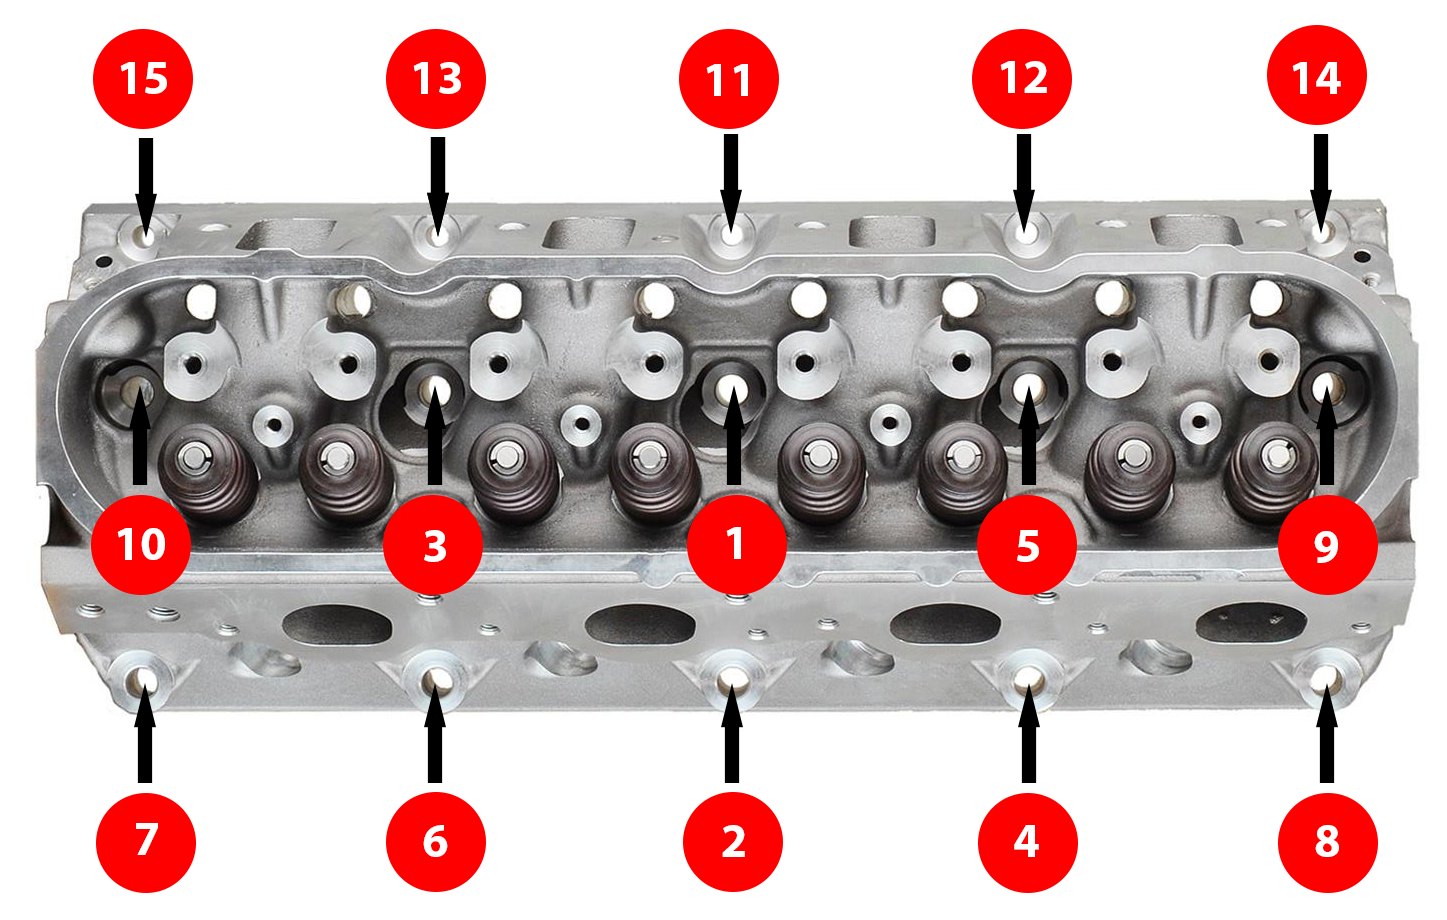 How Do I Install My Ls Cylinder Heads